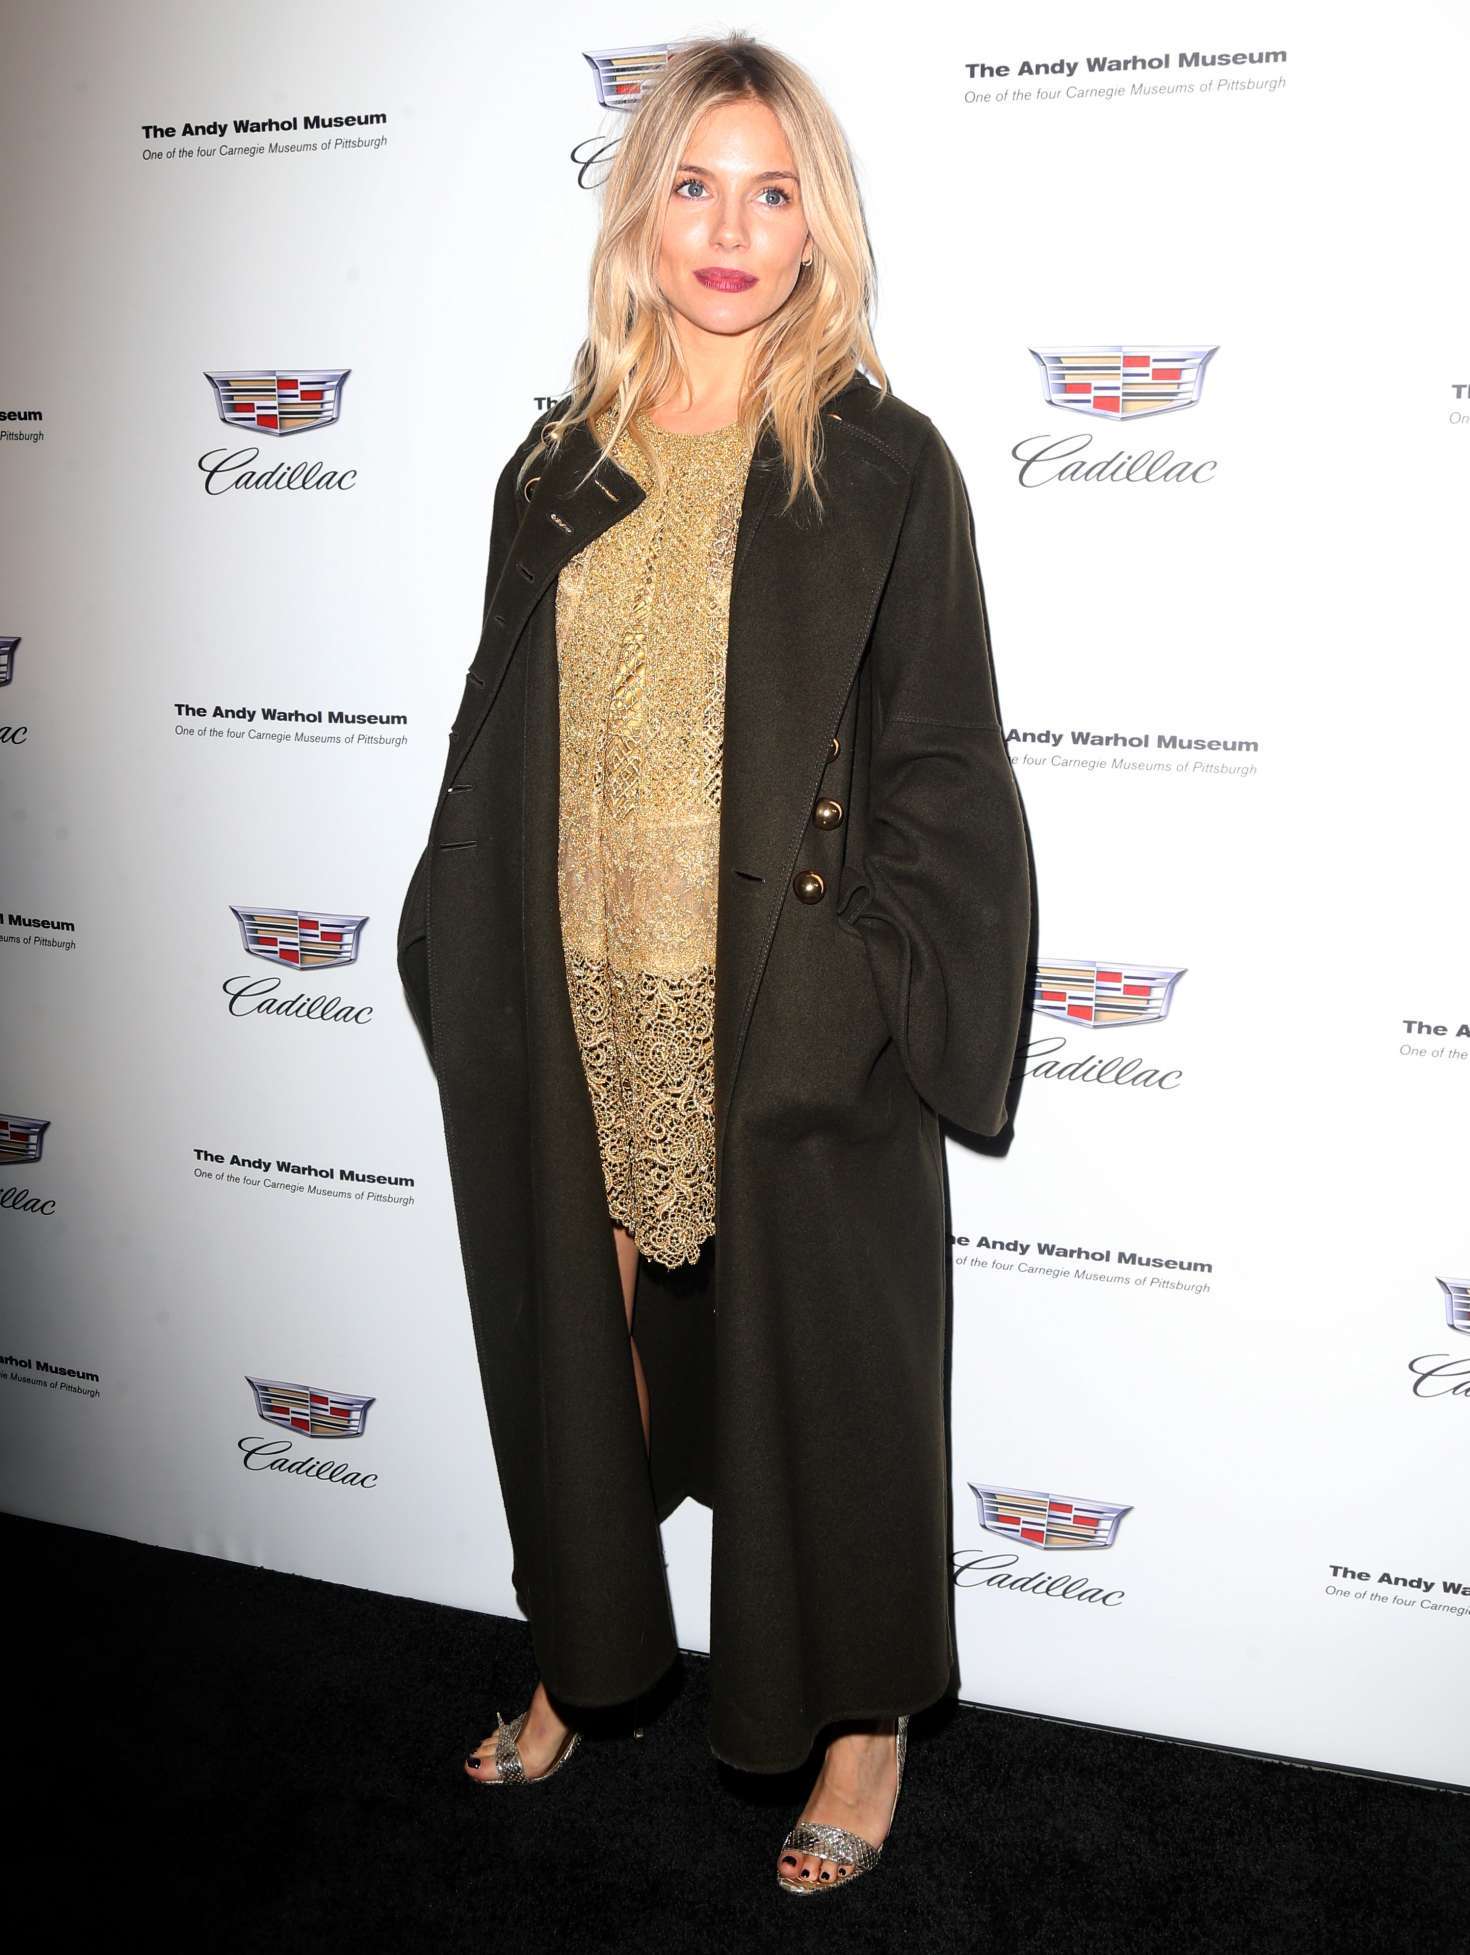 Sienna Miller - 'Letters to Andy Warhol' Exhibition Opening in New York City